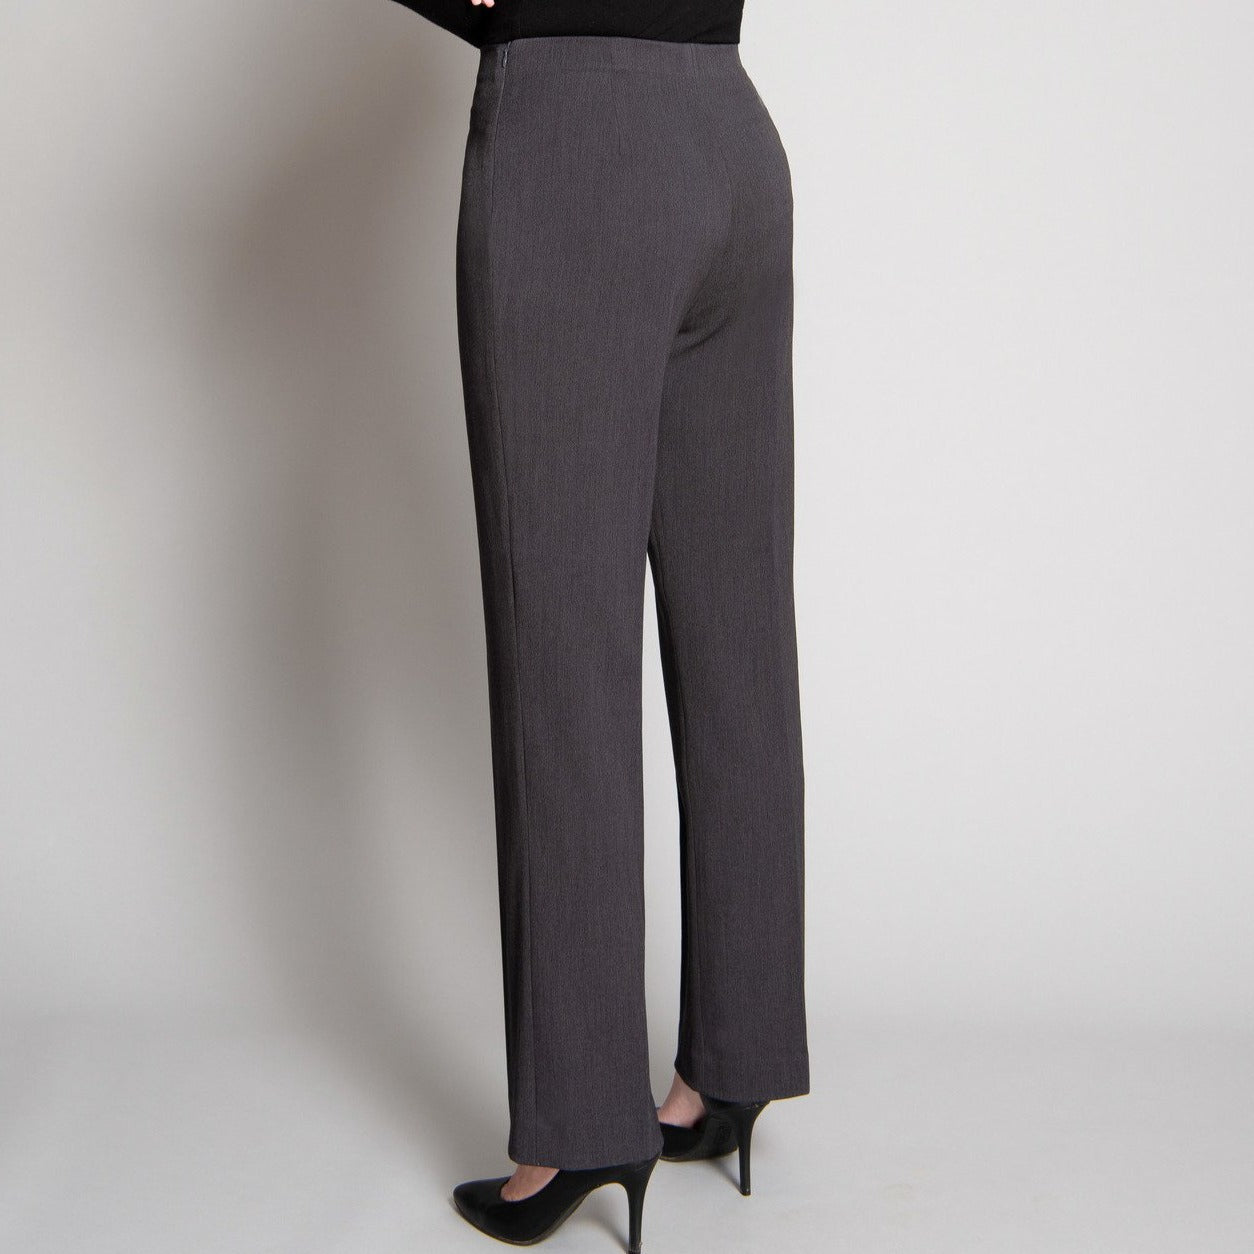 The Ultimate Side-Zip Pant - Espresso Brown